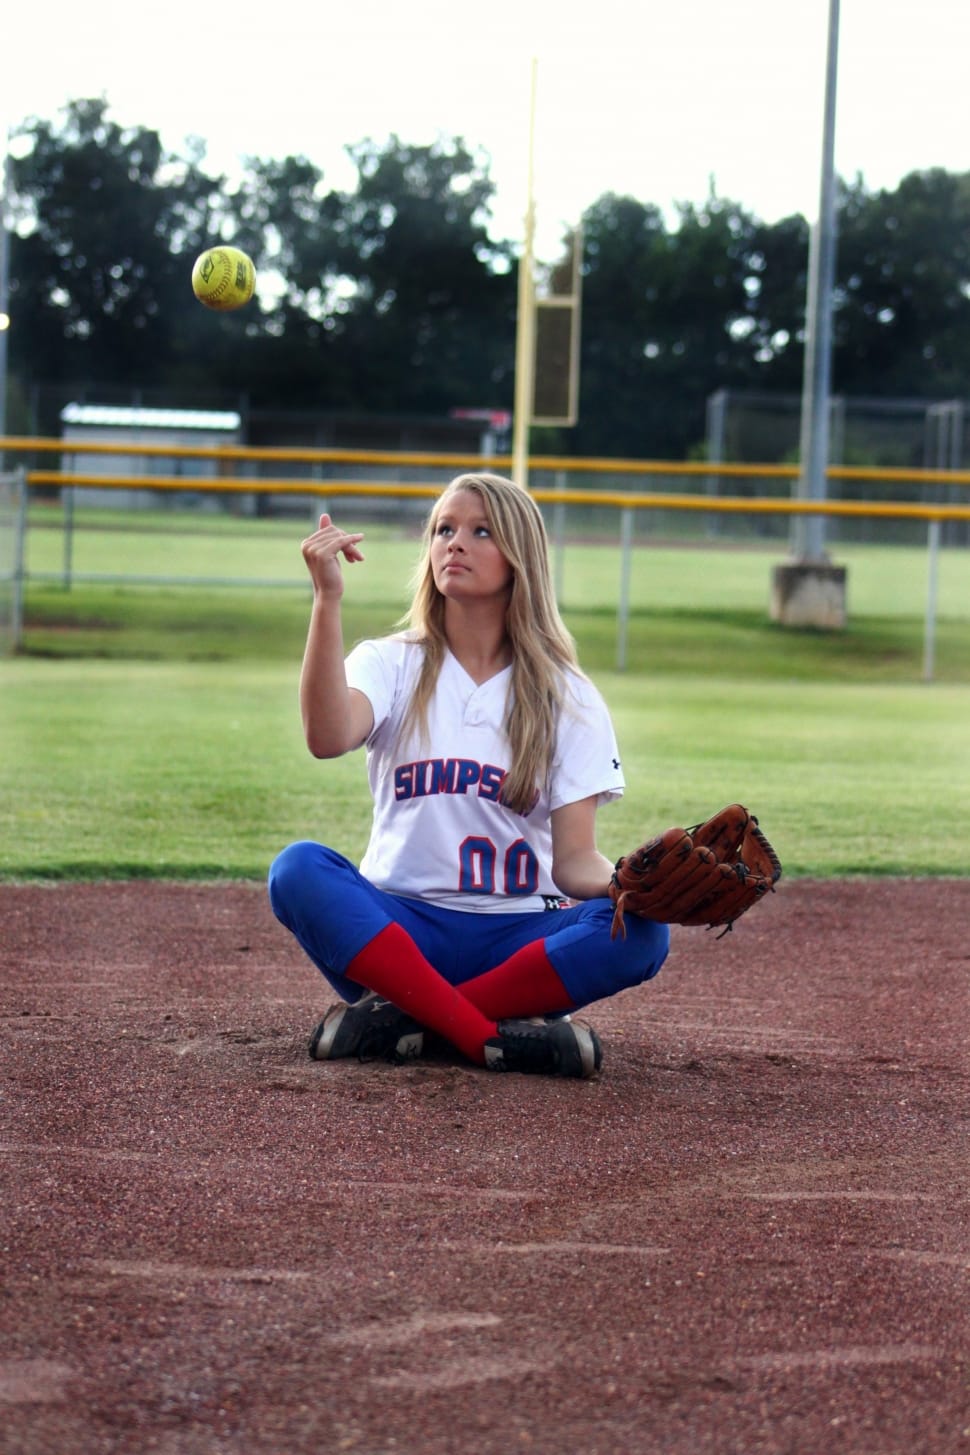 woman in baseball jersey outfit free image | Peakpx